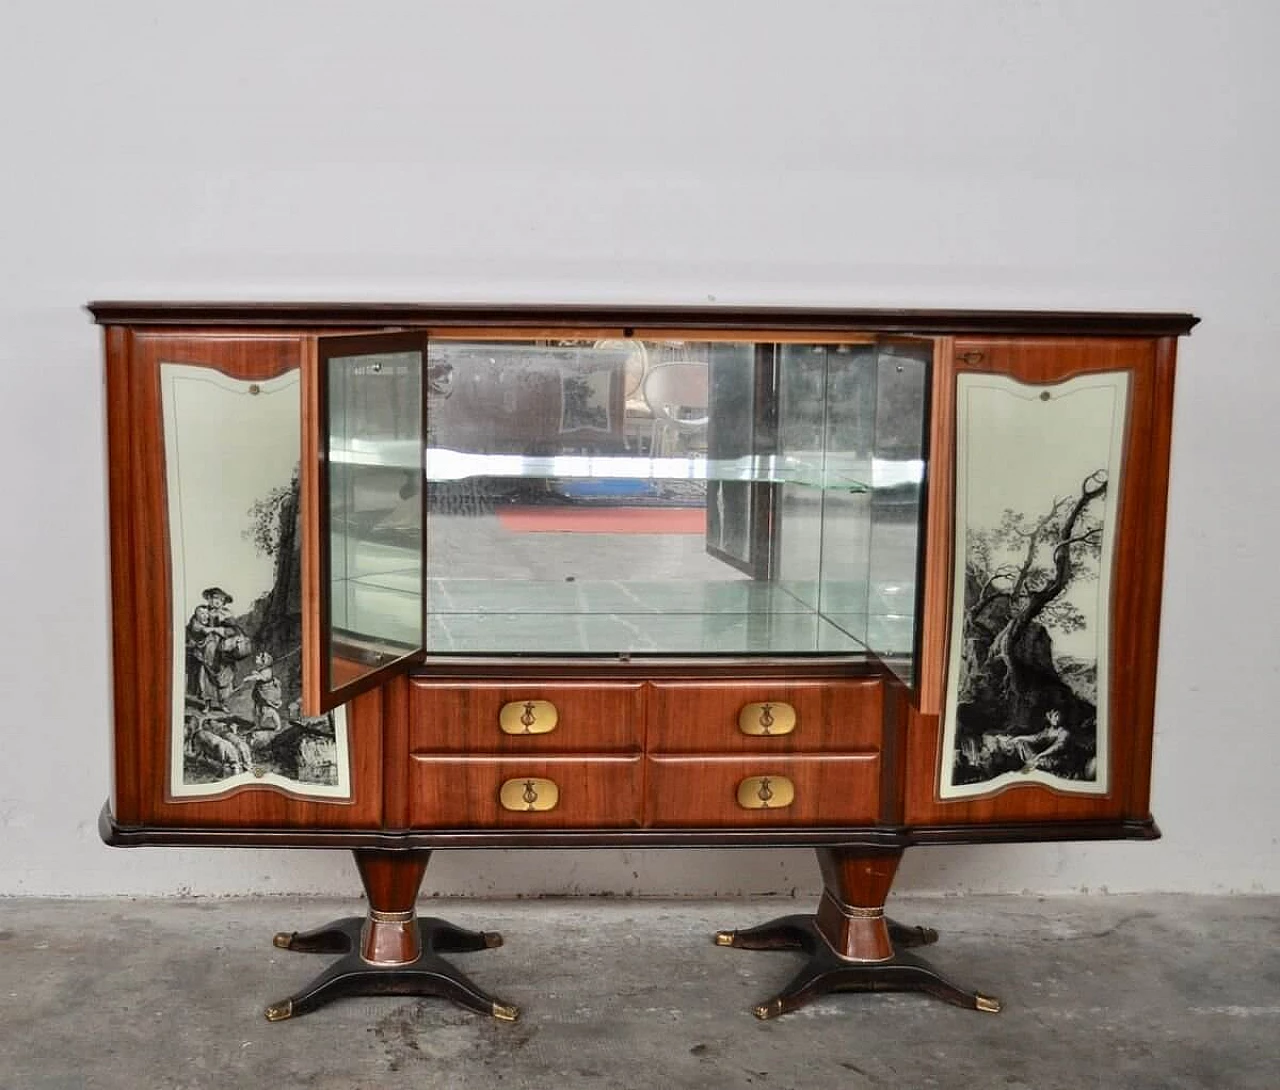 Mahogany, pearwood, brass and glass sideboard with allegorical designs by F.lli Rigamonti Desio, 1940s 1374031